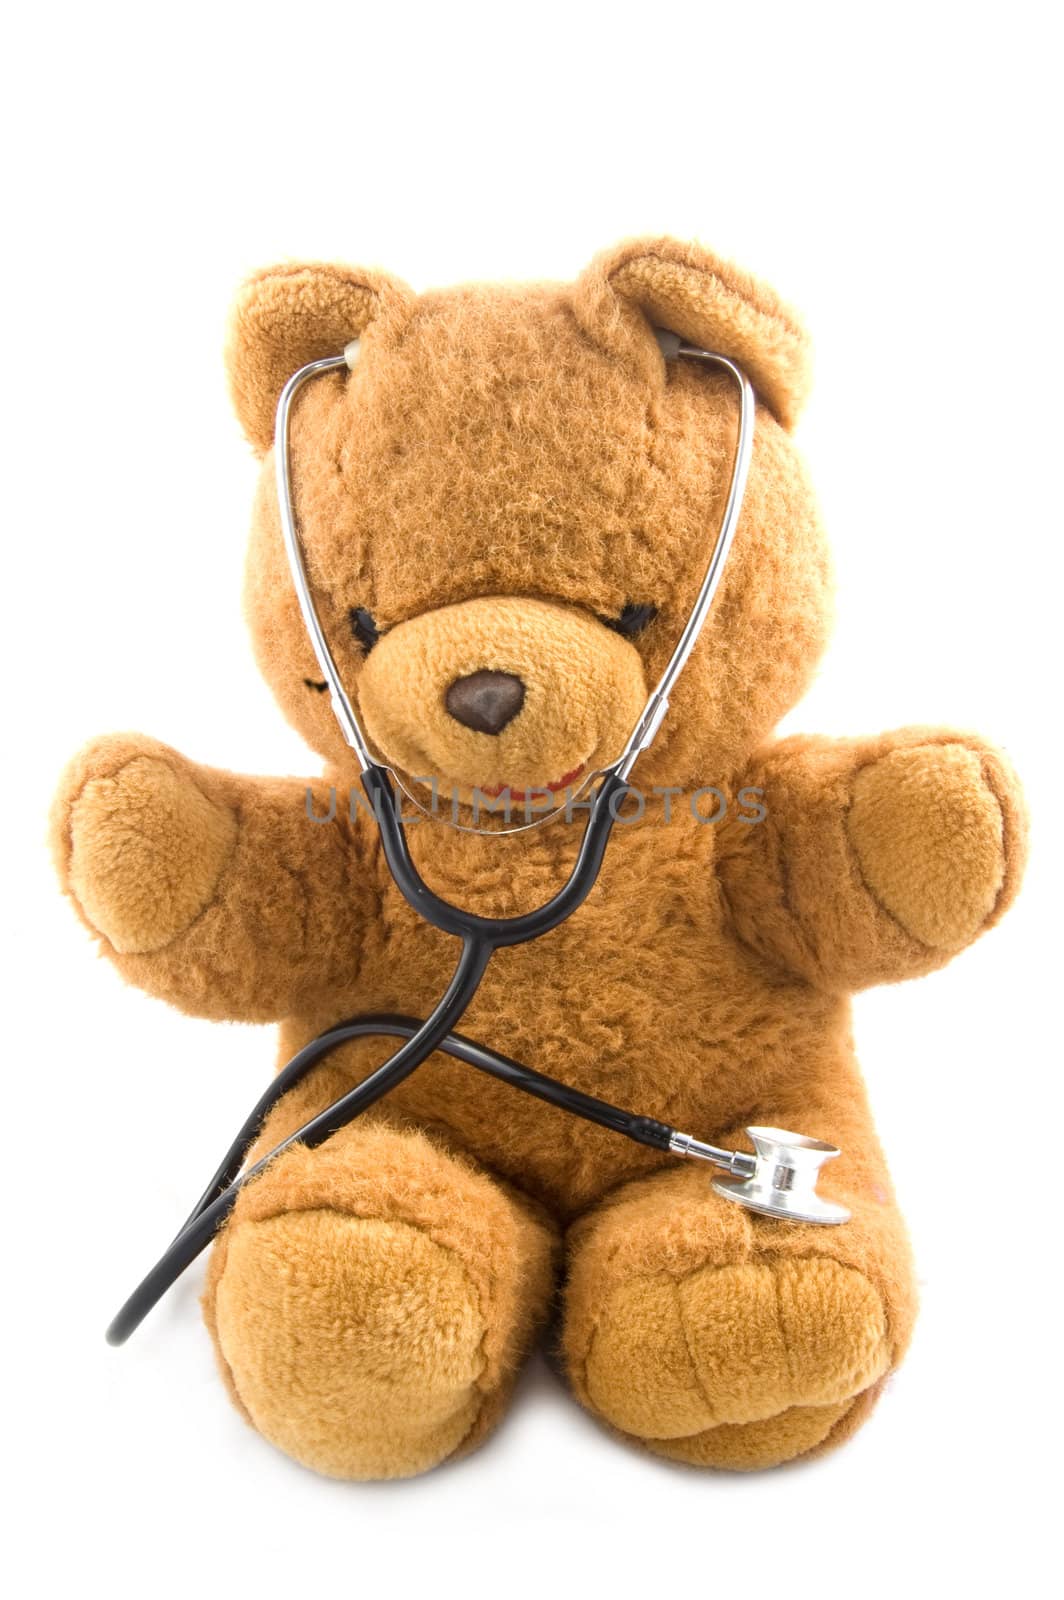 Bown teddybear acting as a doctor with a stetoscope isolated on white